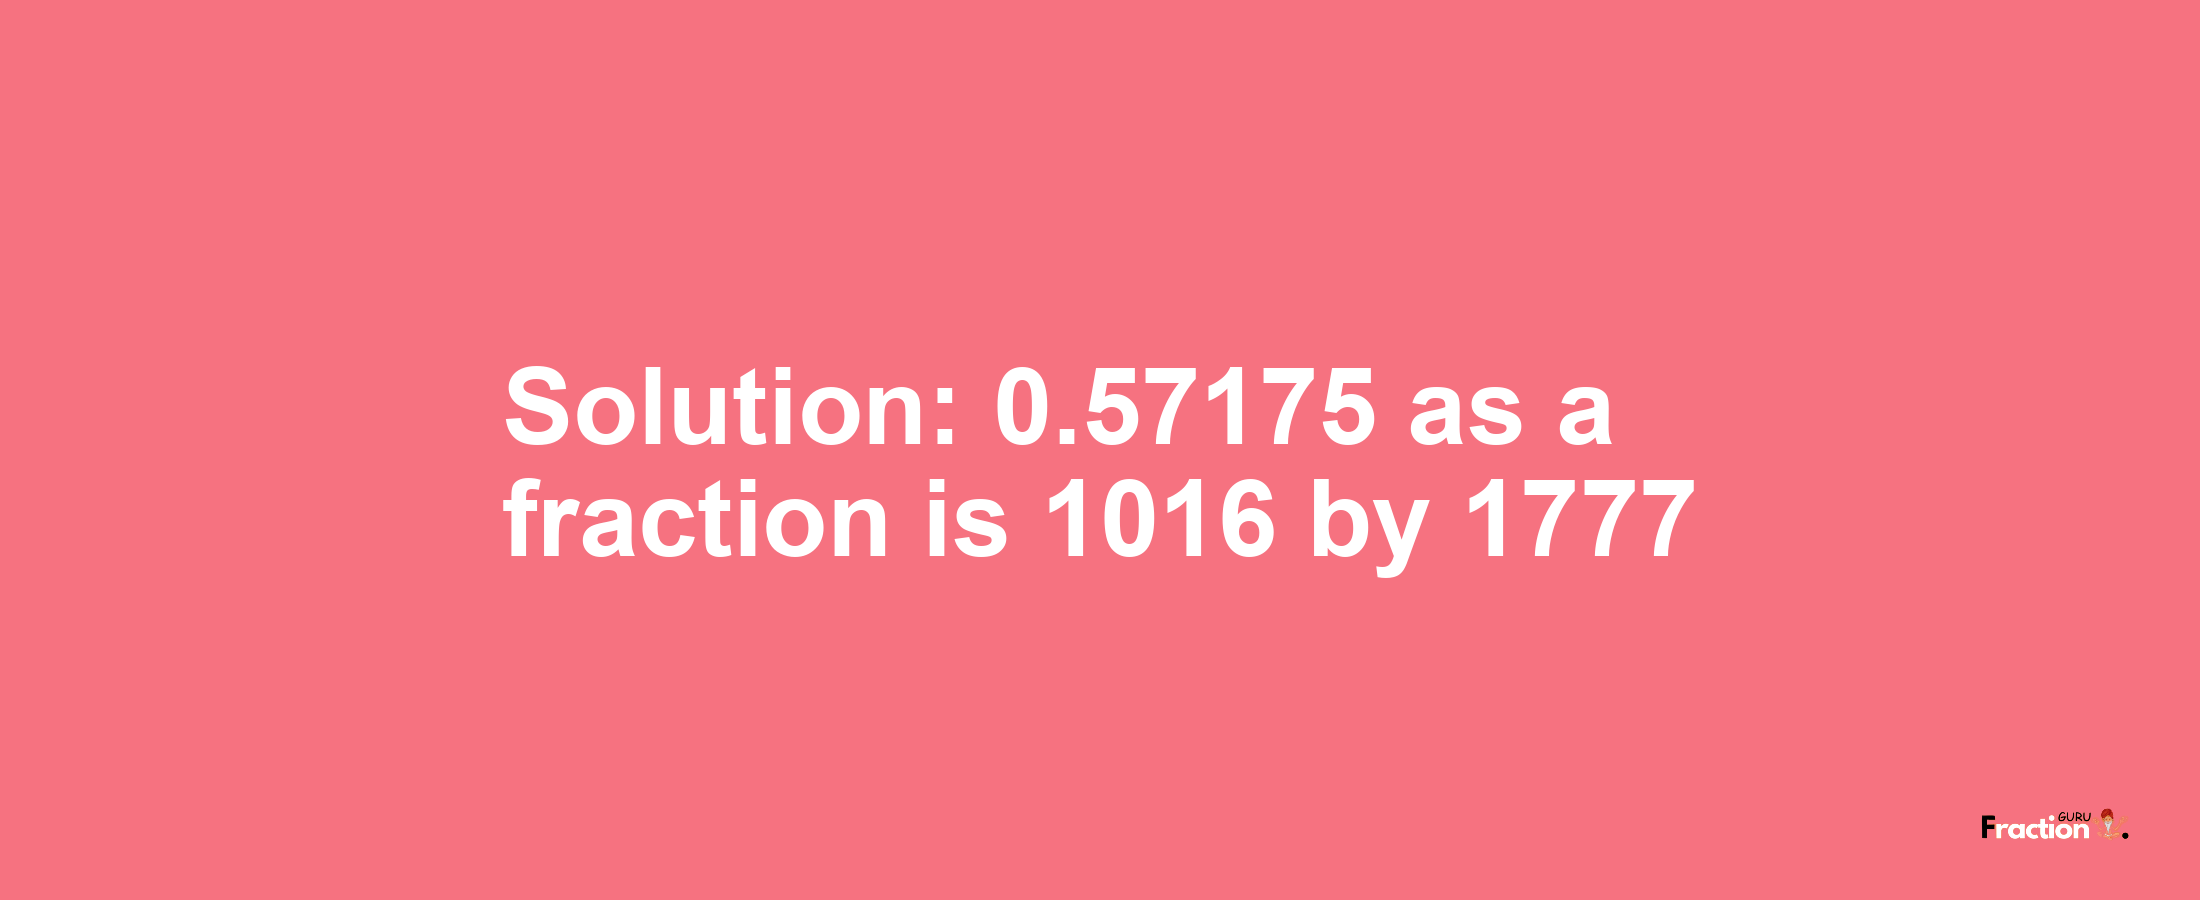 Solution:0.57175 as a fraction is 1016/1777